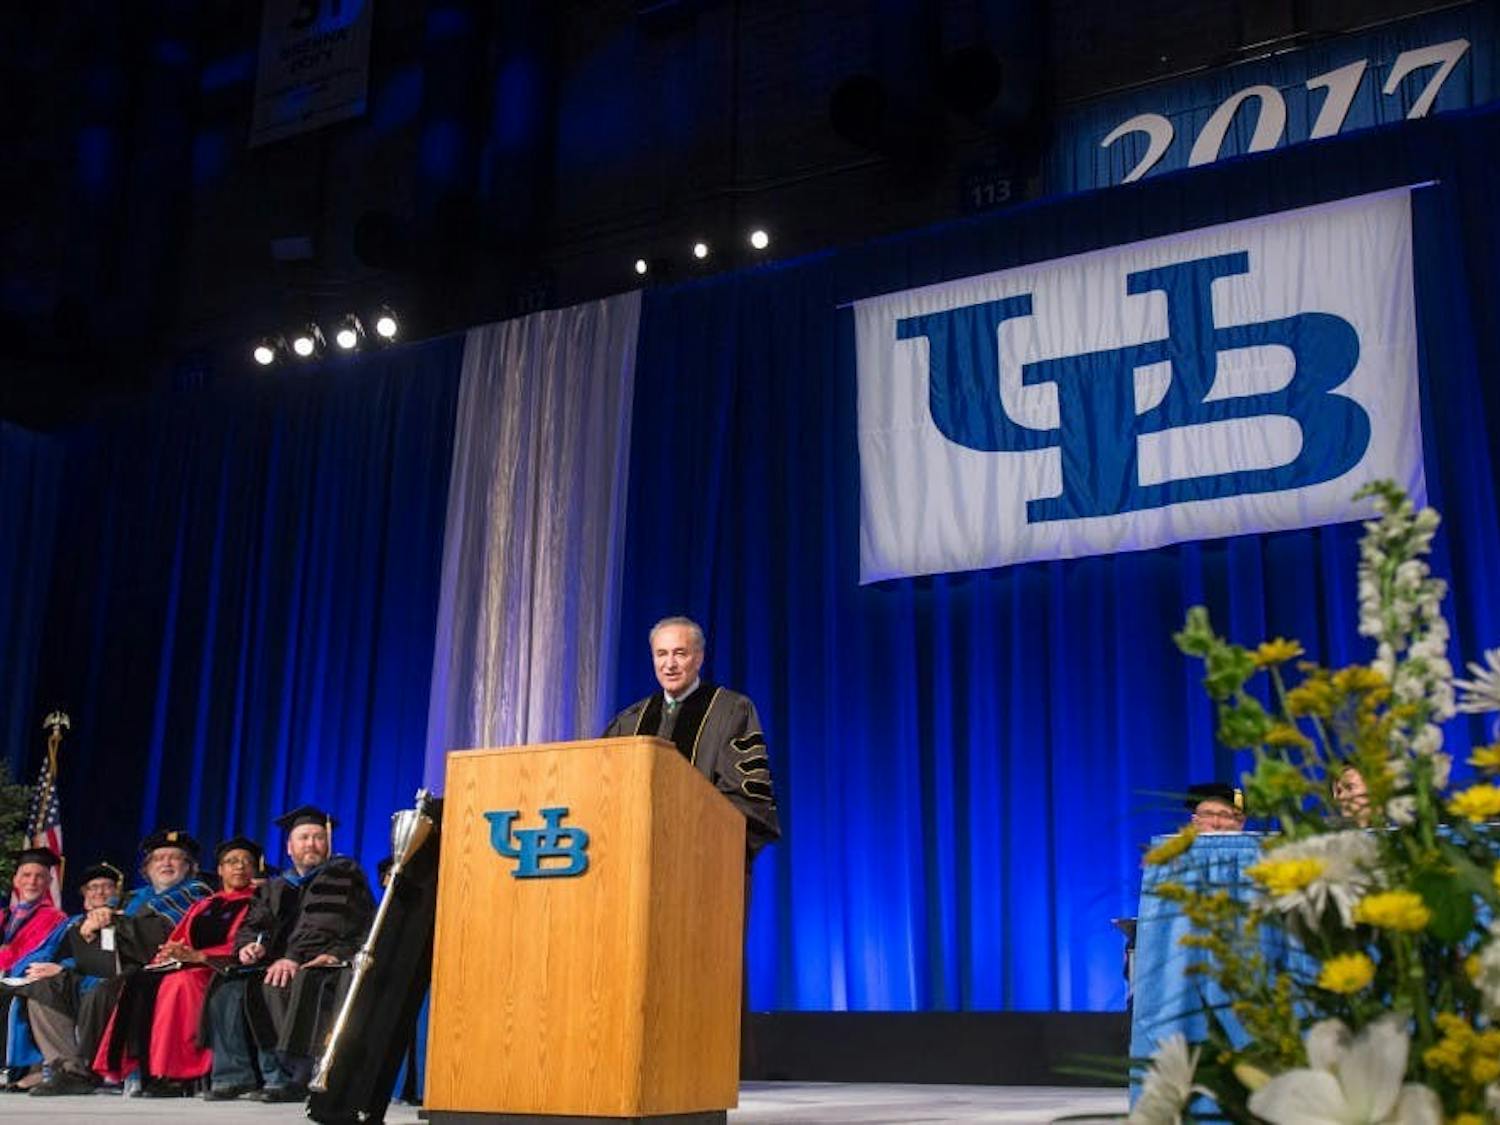 Senate Majority Leader Chuck Schumer (D-NY) speaks to students at UB's 2017 Commencement ceremony.